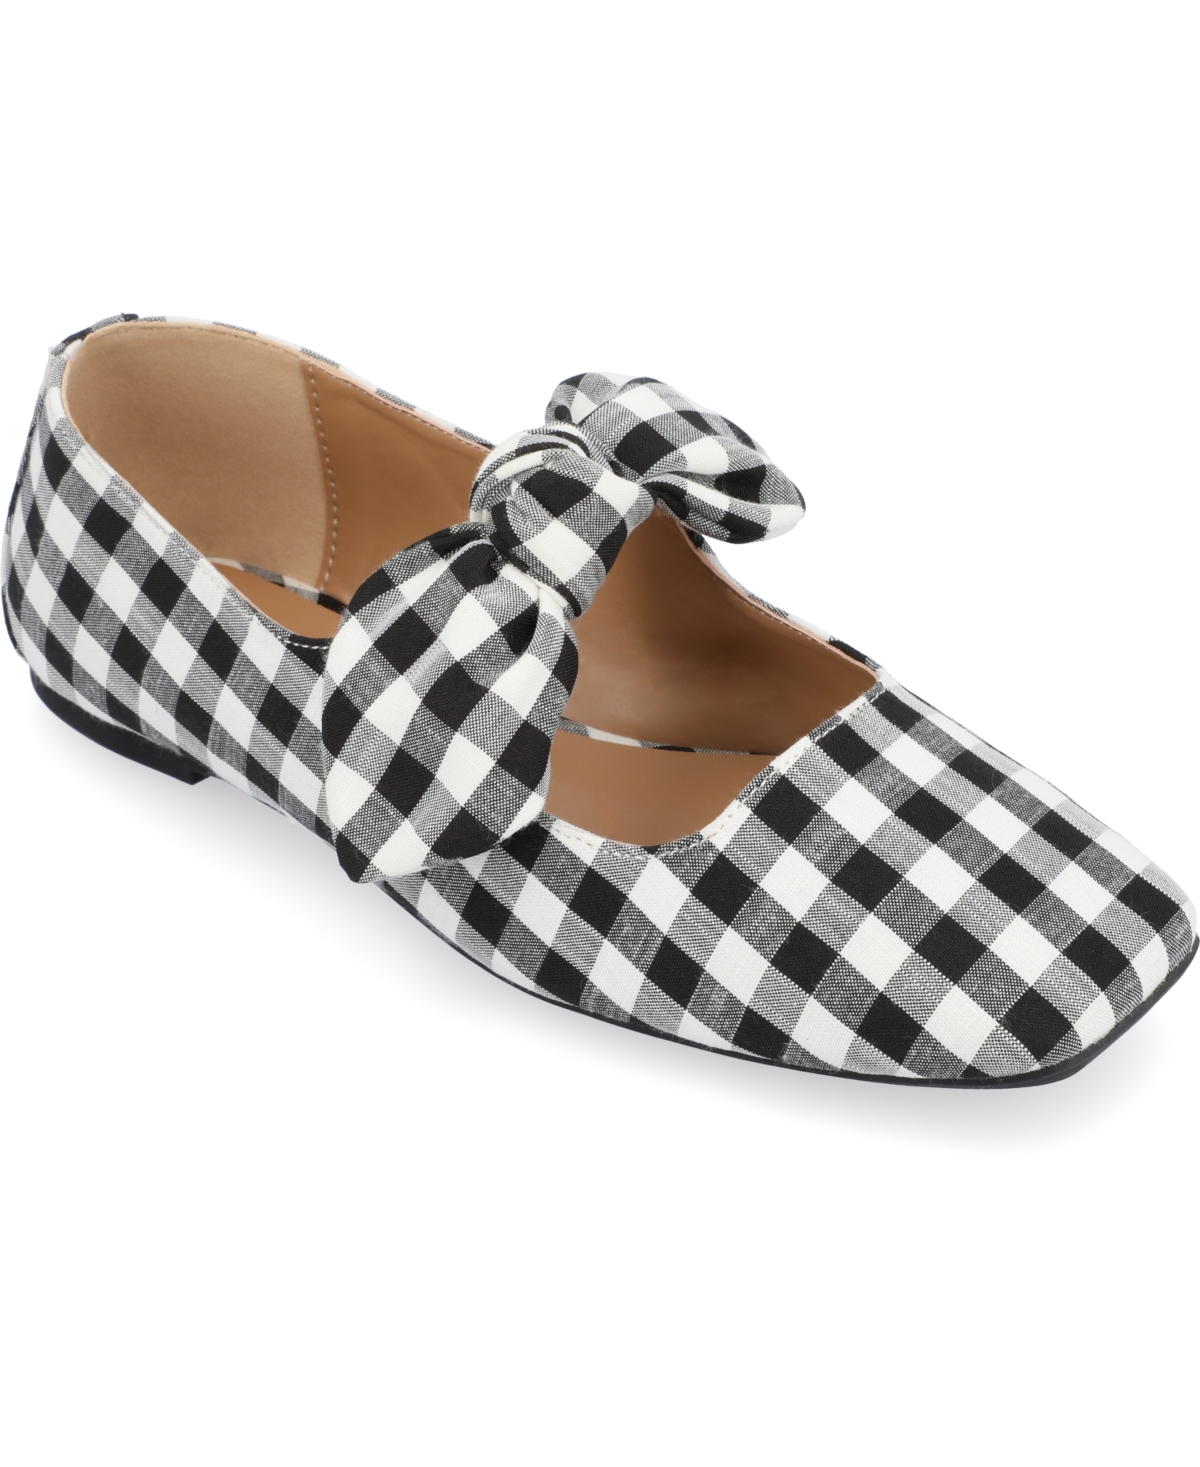 Journee Collection Women's Seralinn Bow Square Toe Flats In Plaid Black